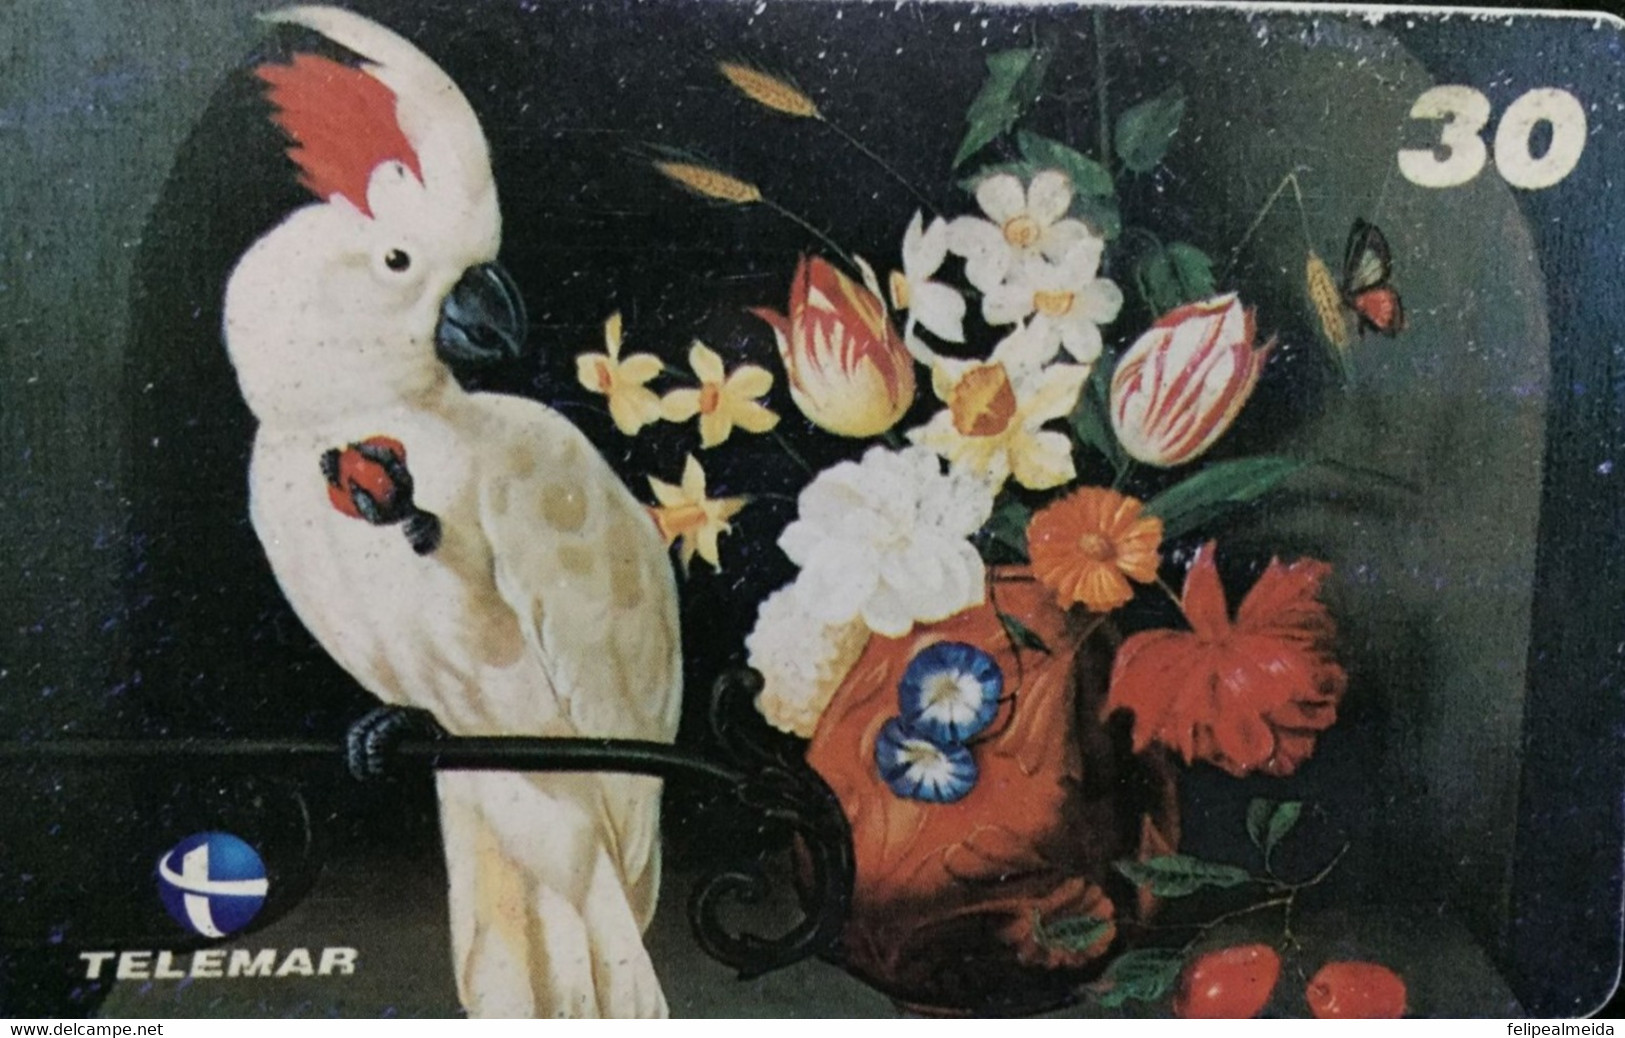 Phone Card Manufactured By Telemar In 2000 - Painting Cockatoo And Flowers - Painter Nilton Mendoça - Pittura